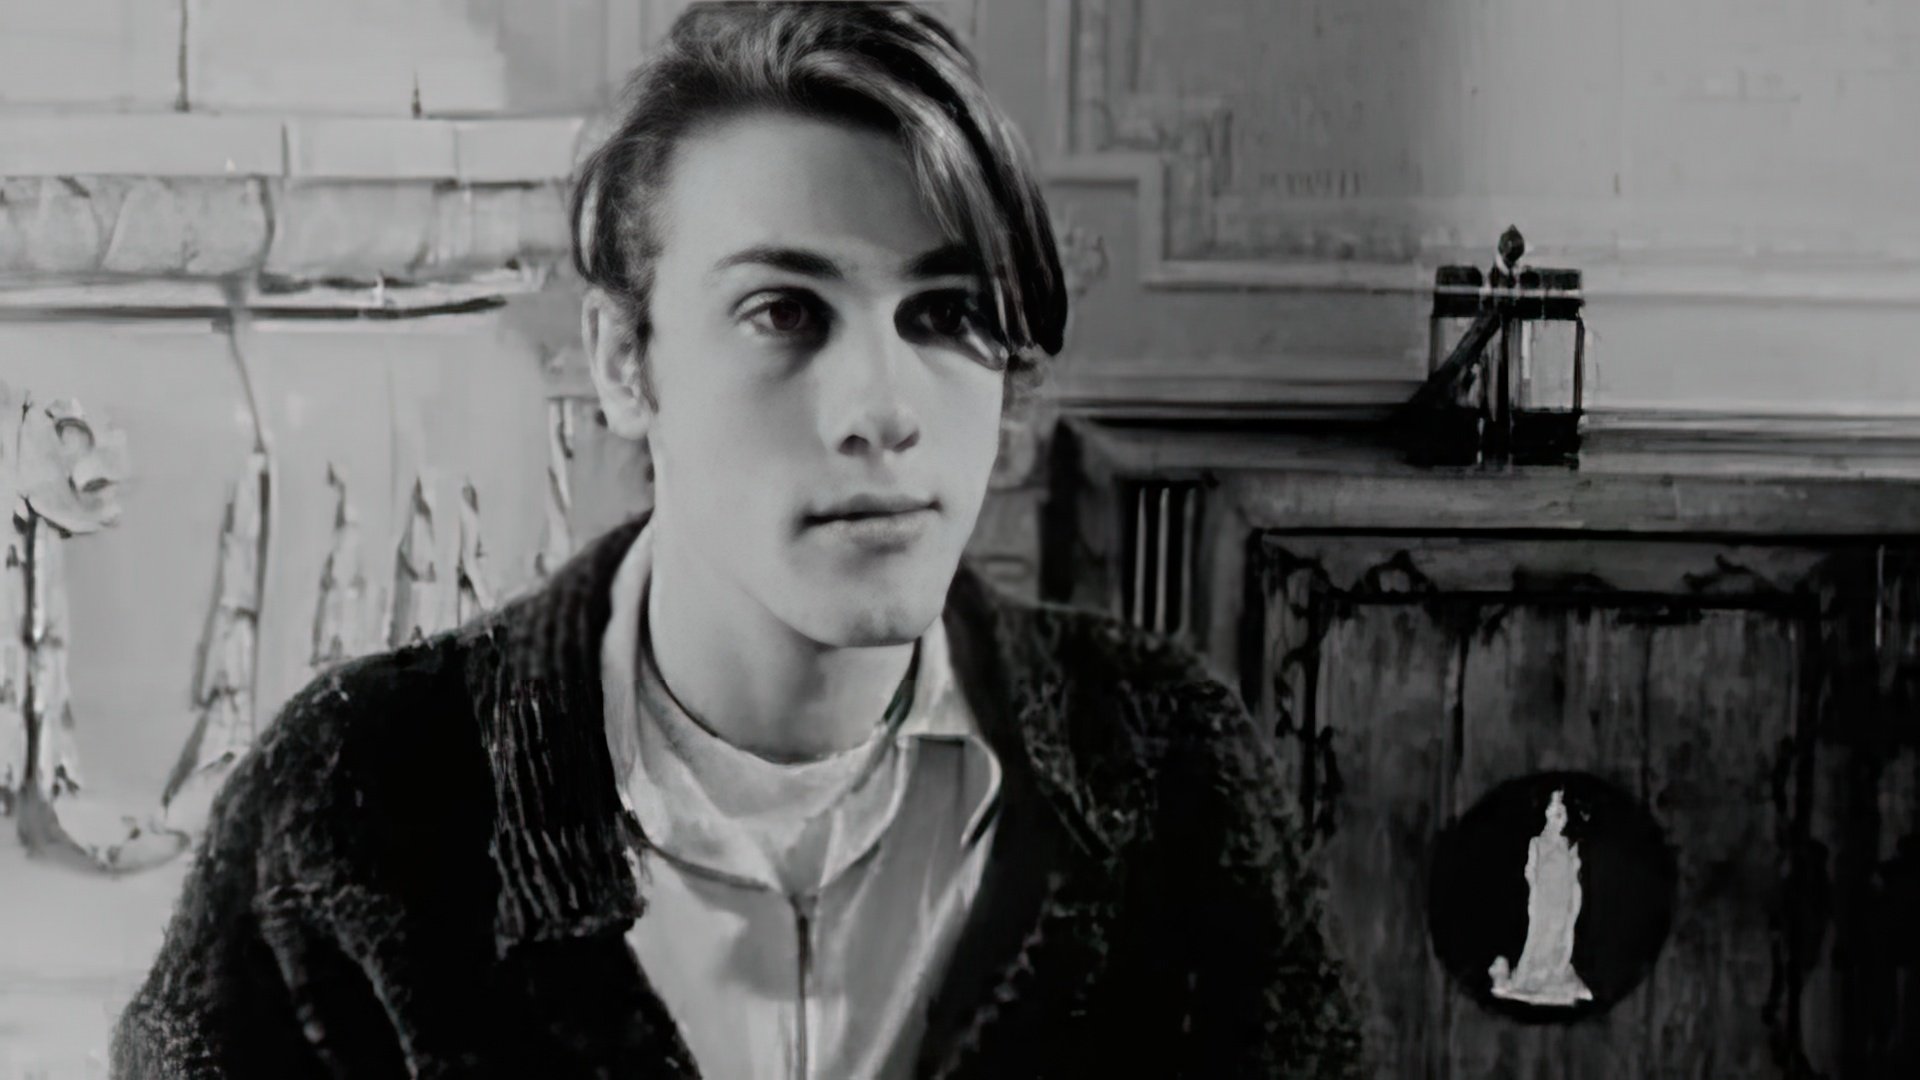 Christoph Waltz in his youth